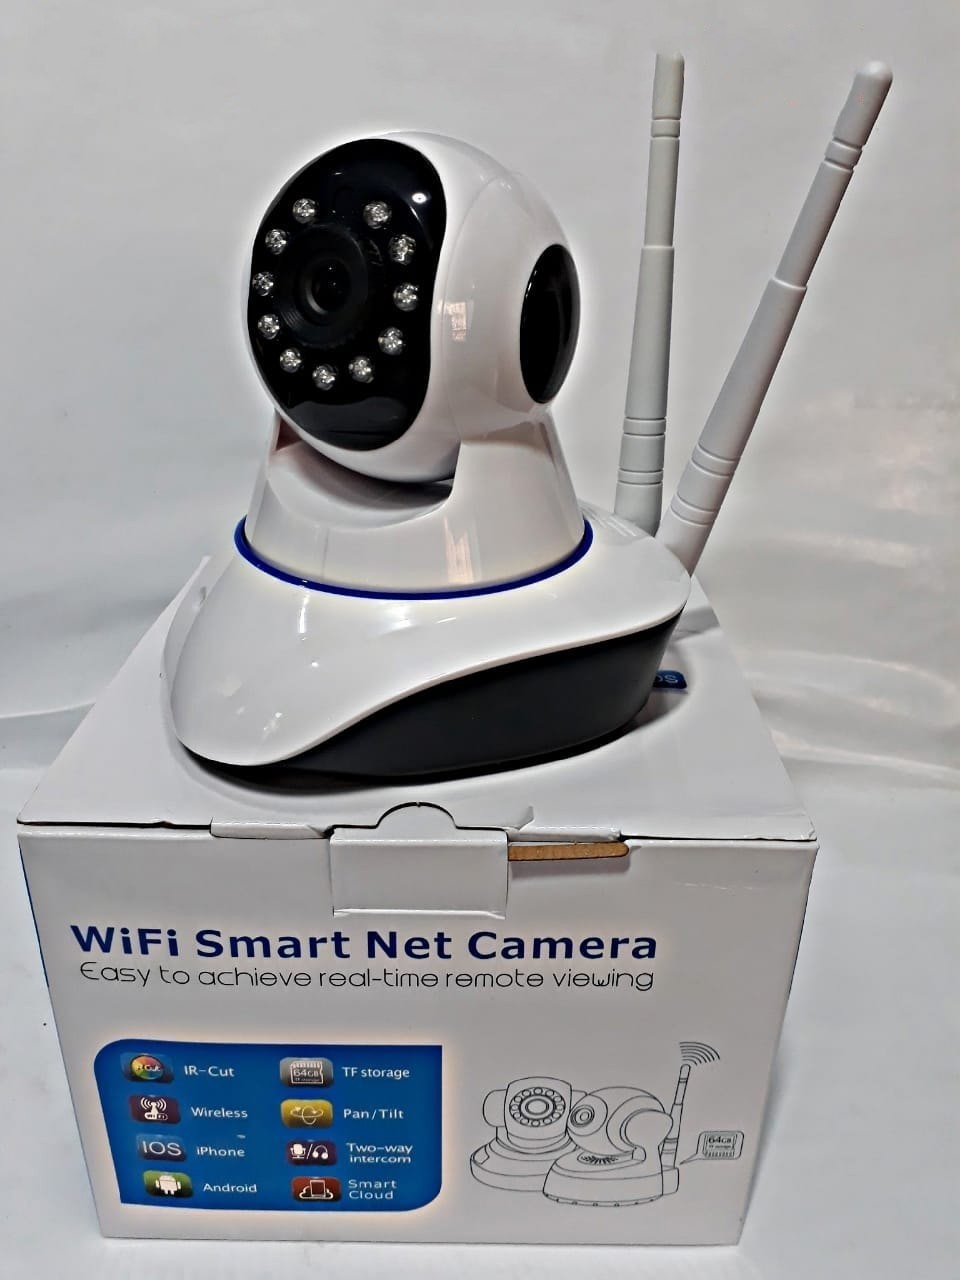 Wifi Smart Net Camera easy to achieve Real Time